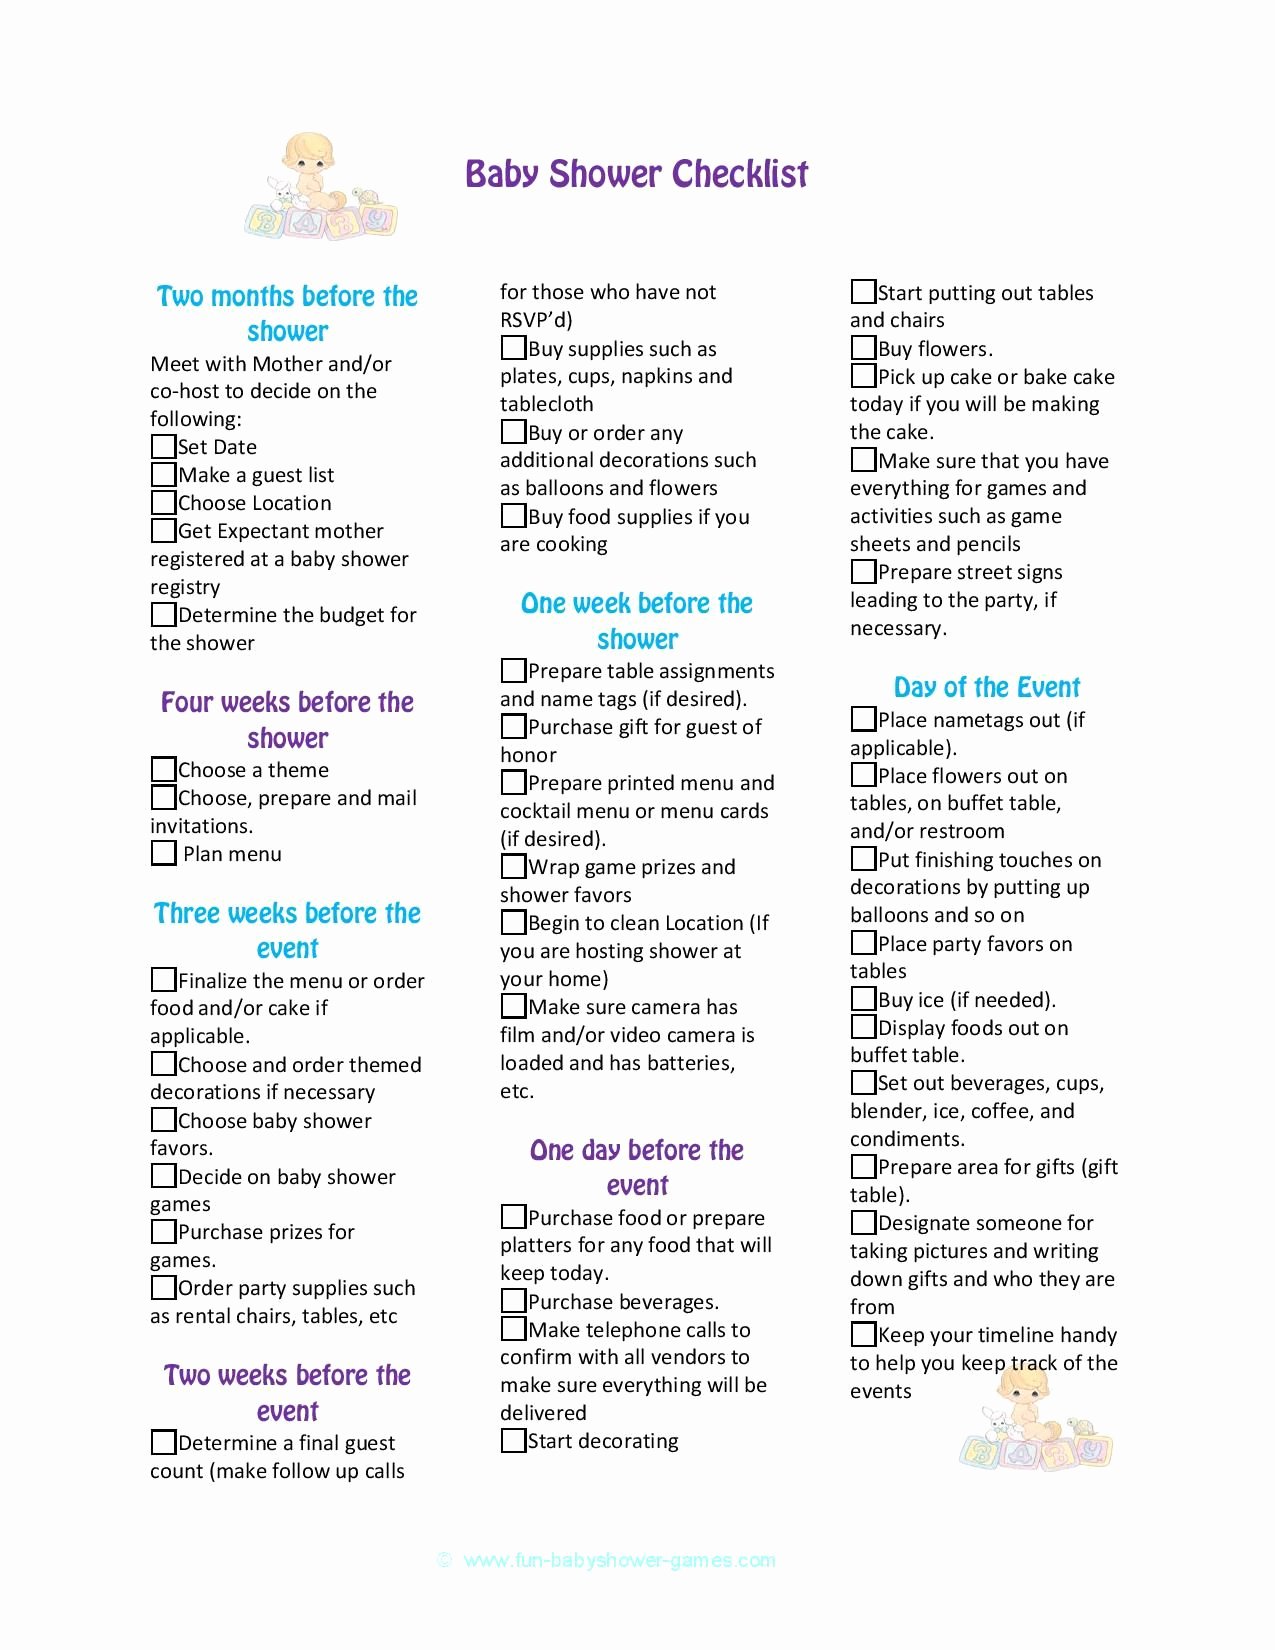 Baby Shower Planning Check List Beautiful Baby Shower Checklist to Help Plan the Perfect Baby Shower